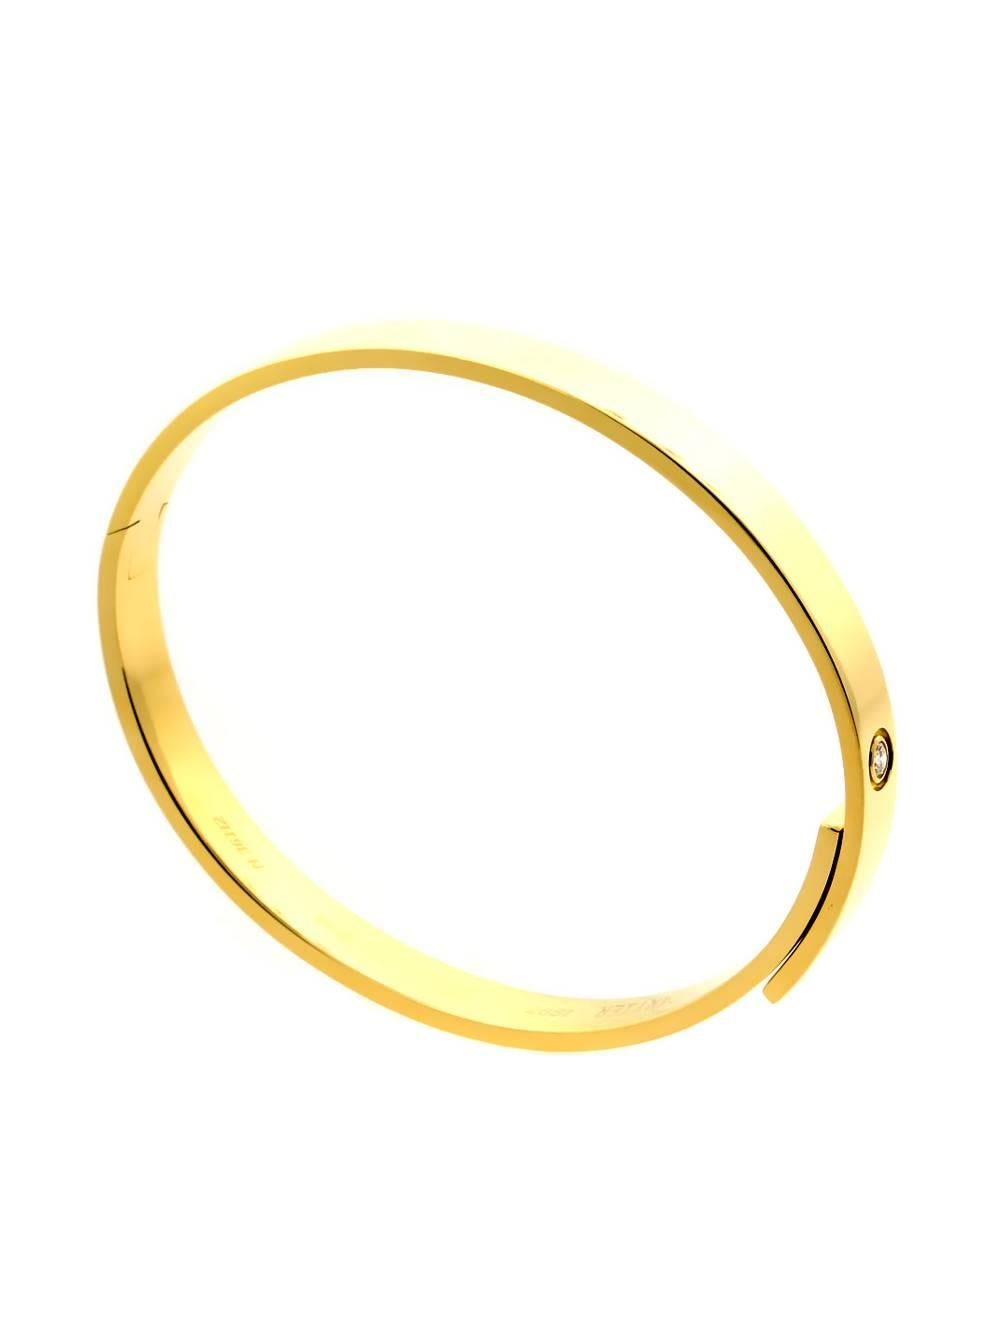 A chic 18k yellow gold Cartier diamond bangle bracelet from the late 90's, set with a .10ct round brilliant cut diamond.

Weight: 41.3 Grams
Length: 7.08